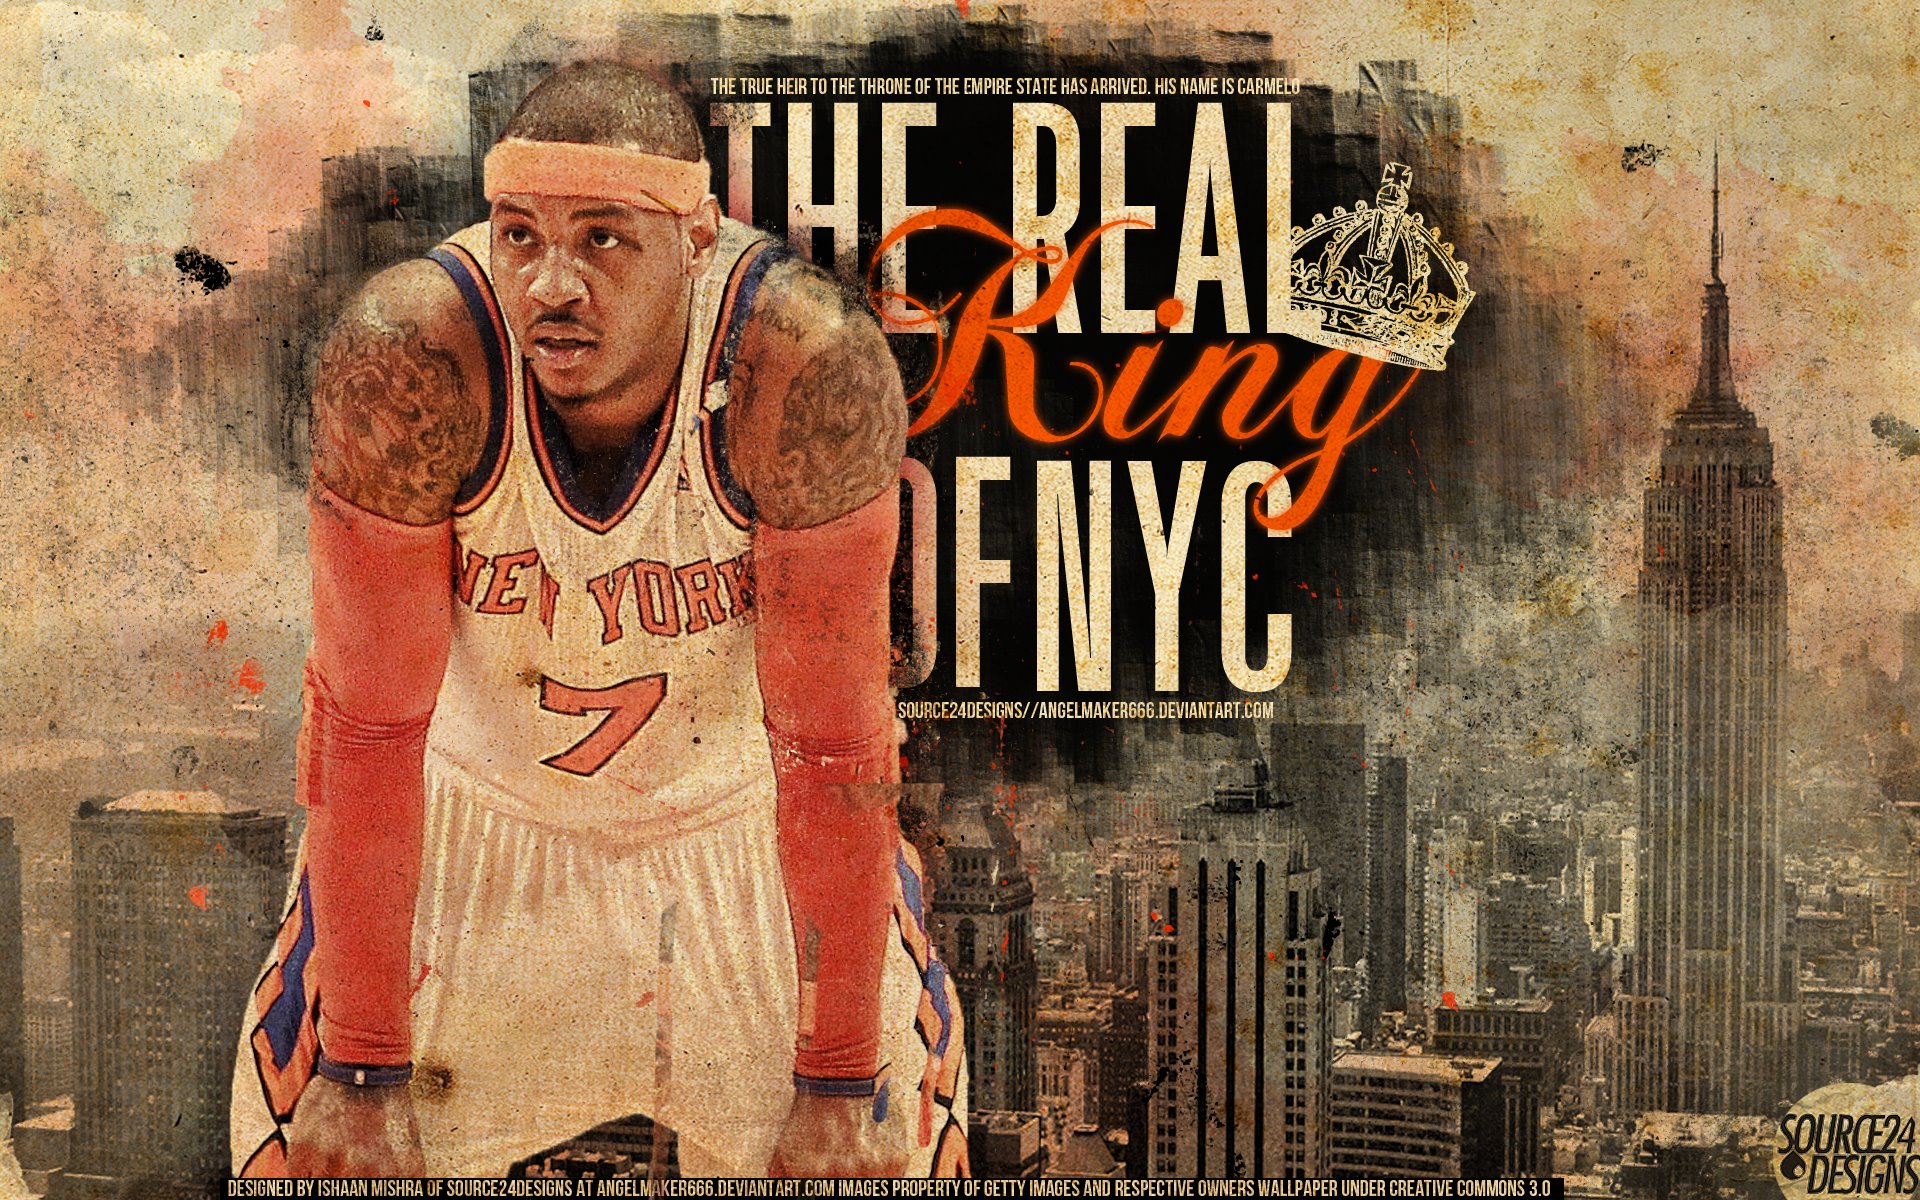 Download Carmelo Anthony New York Knicks Game Wallpaper